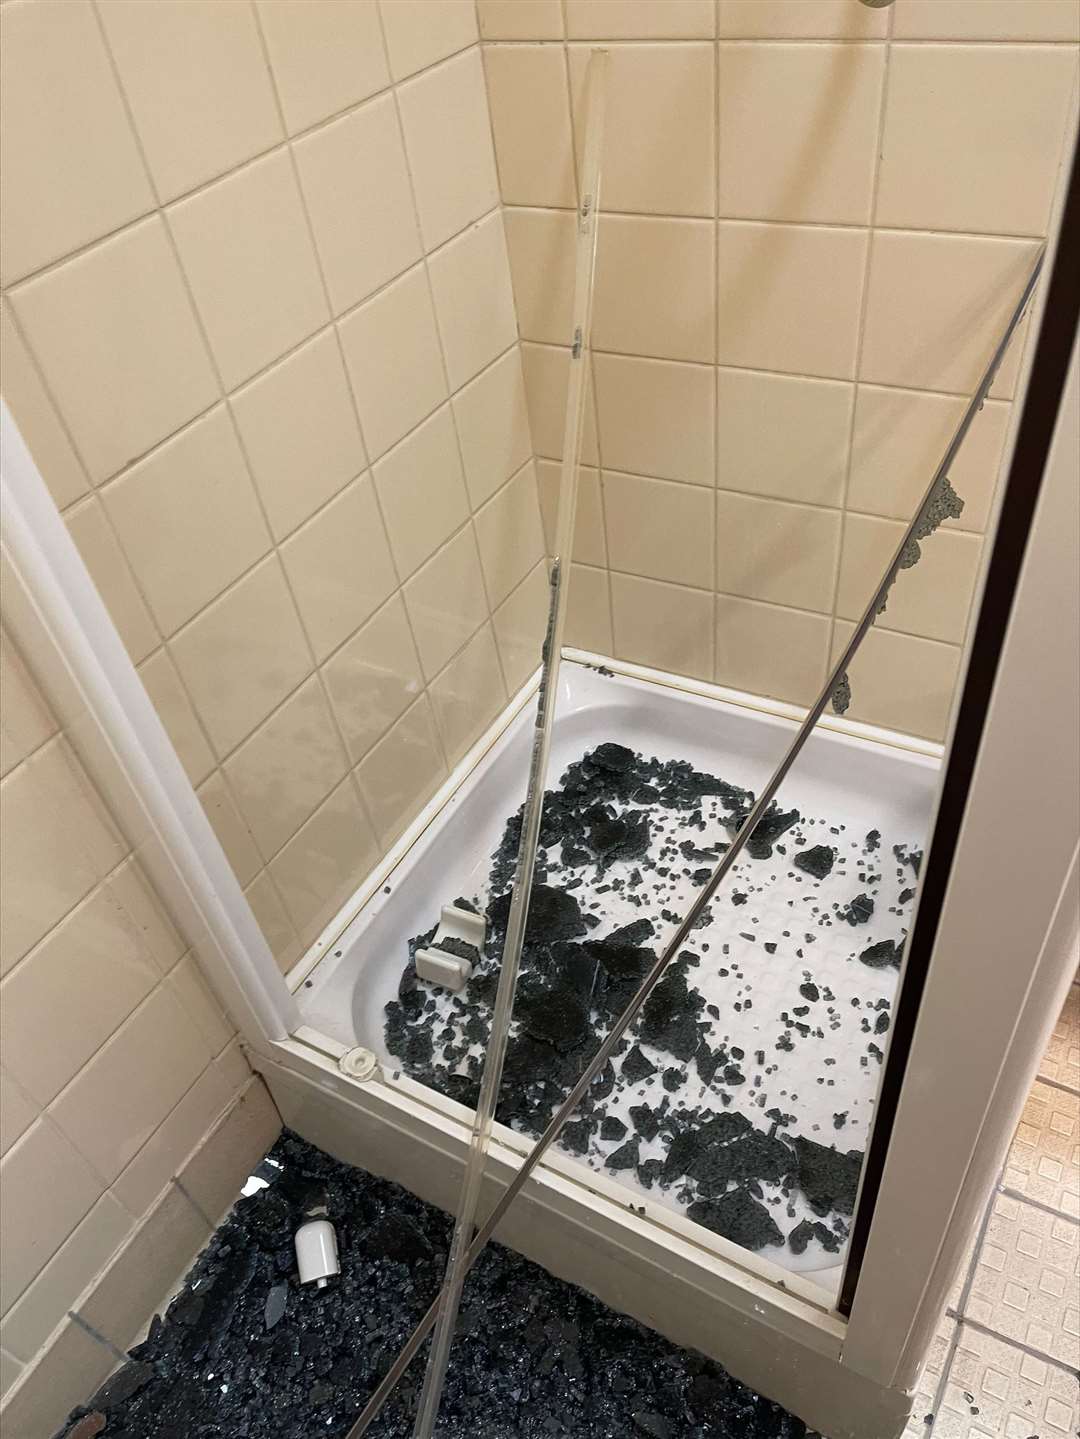 A smashed shower cabinet inside the Ardvonie facility.